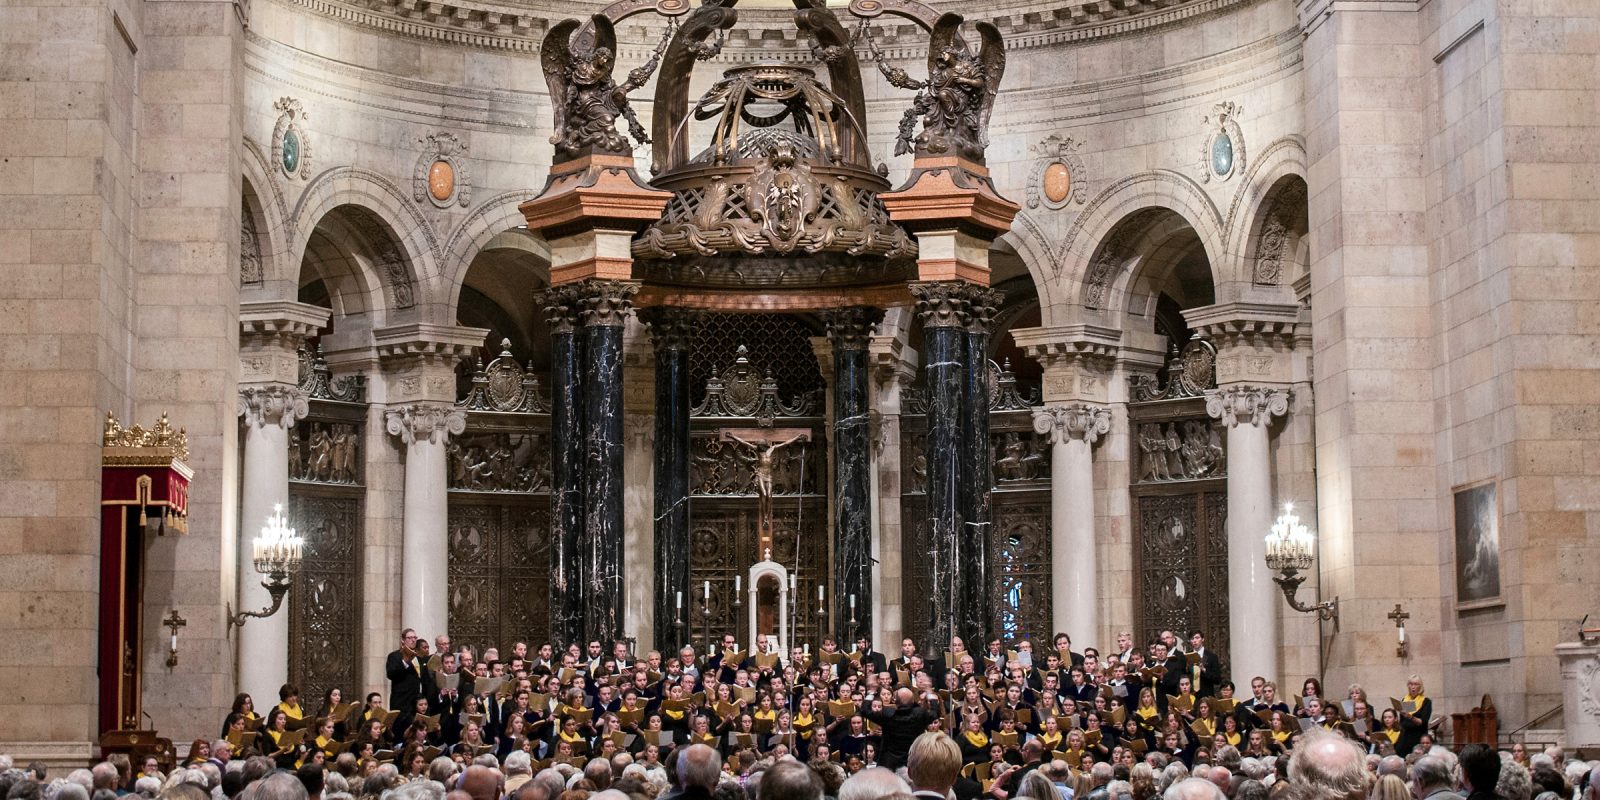 Many singers perform in front of an audience in the ornate sanctuary of the Cathedral of Saint Paul that features a baldachin with black and gold marble columns that has a bronze latticework canopy. Photo Credit: Bruce Silcox